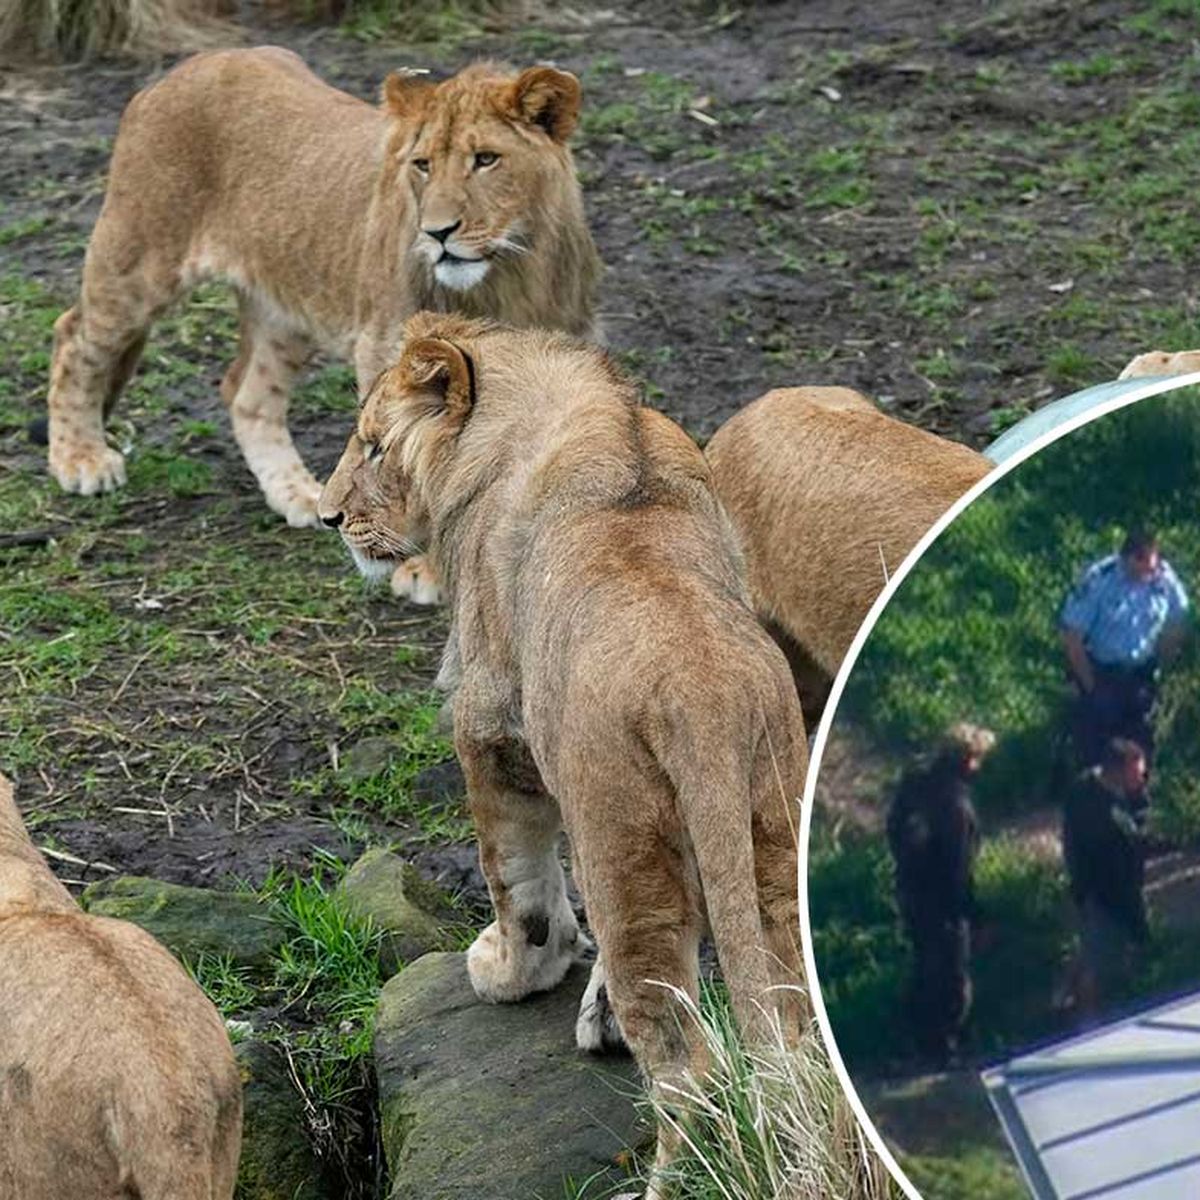 Taronga Zoo Sydney update: Guests told to 'run' after five lions broke free  of enclosure